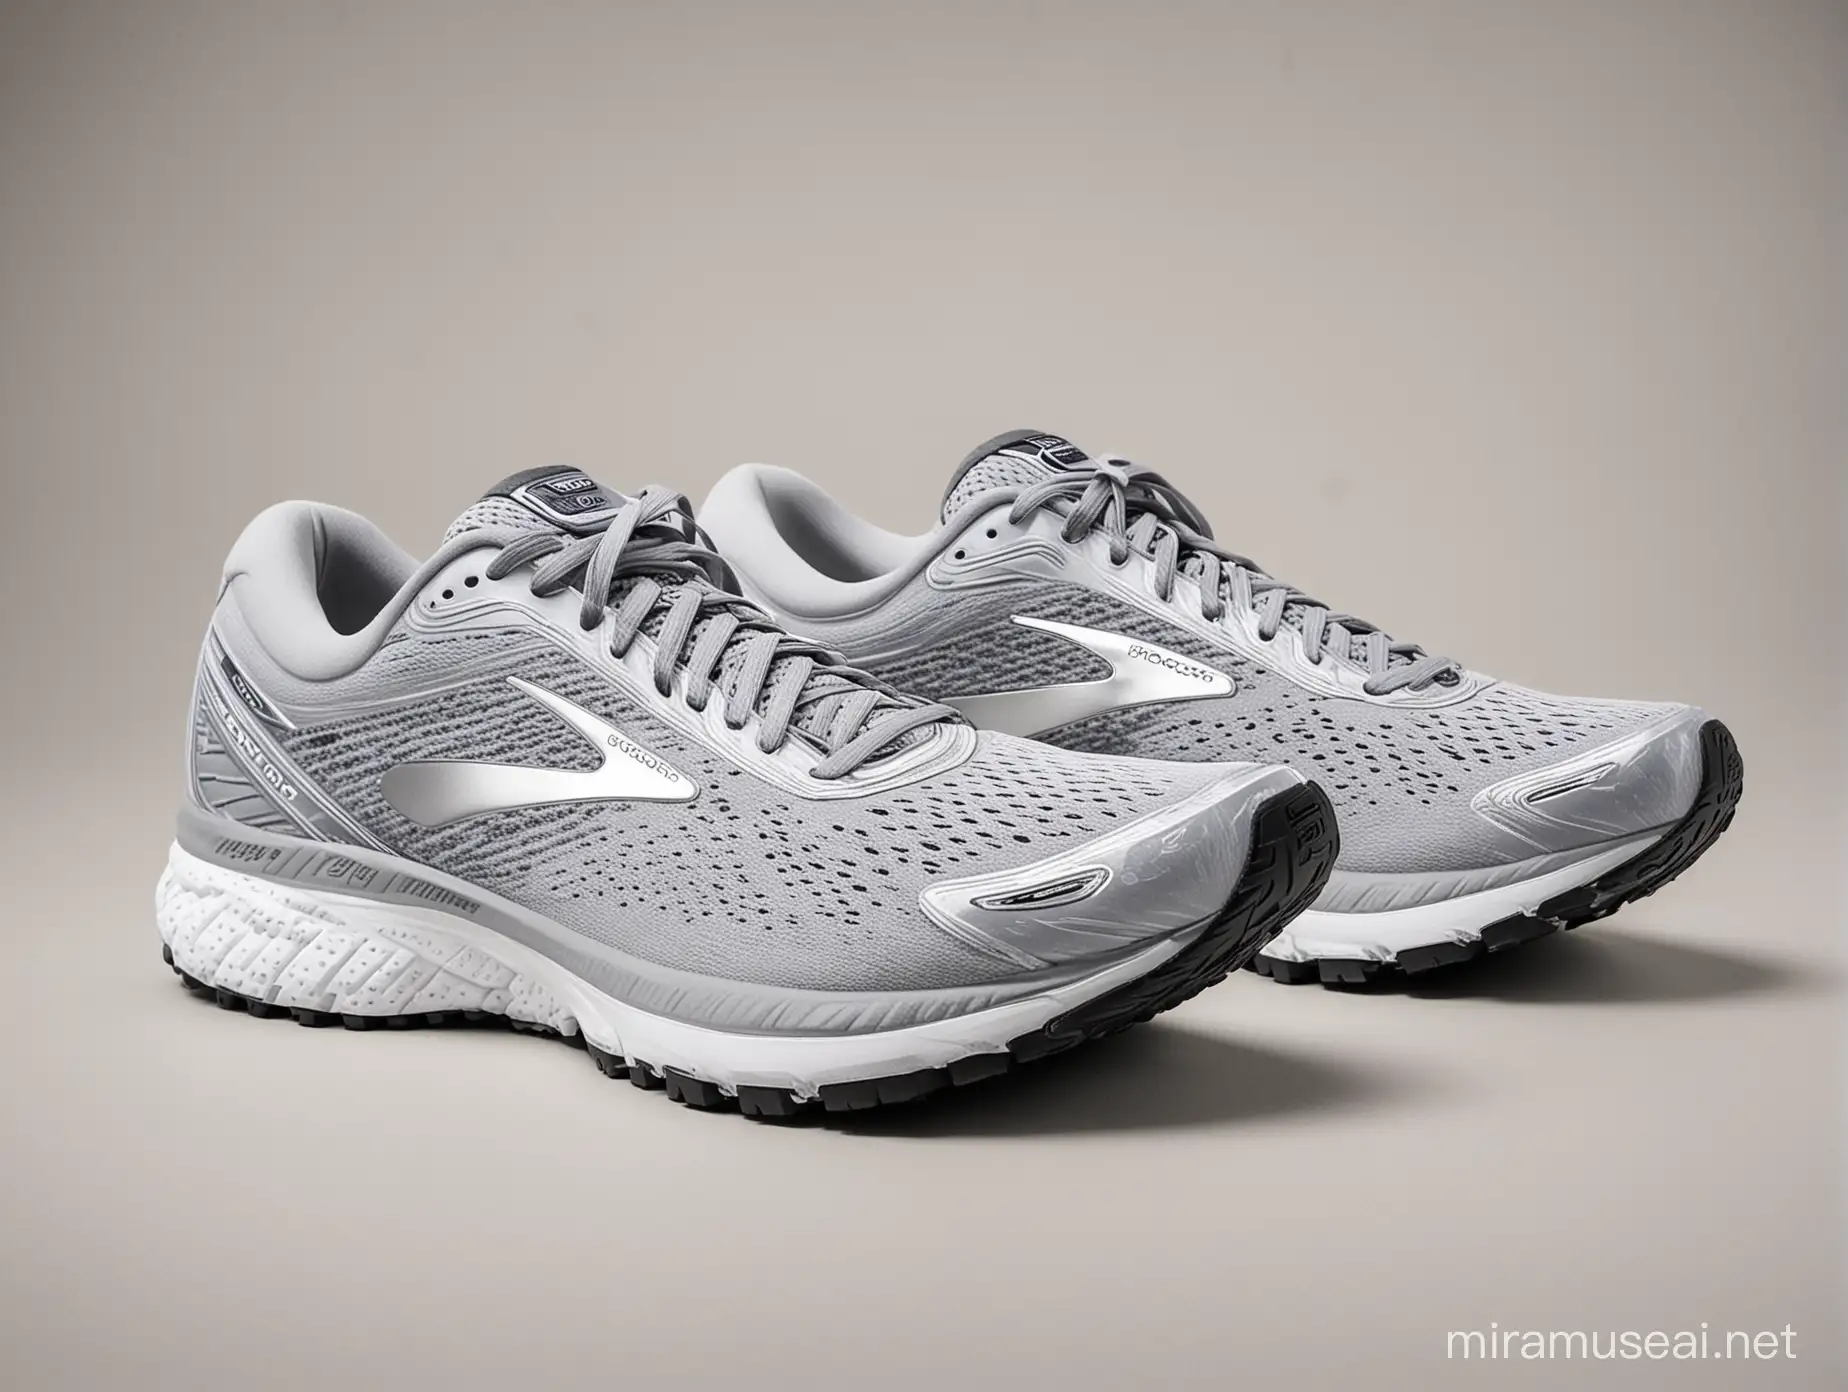 Brooks Ghost 15 Running Shoes on Light Grey Background